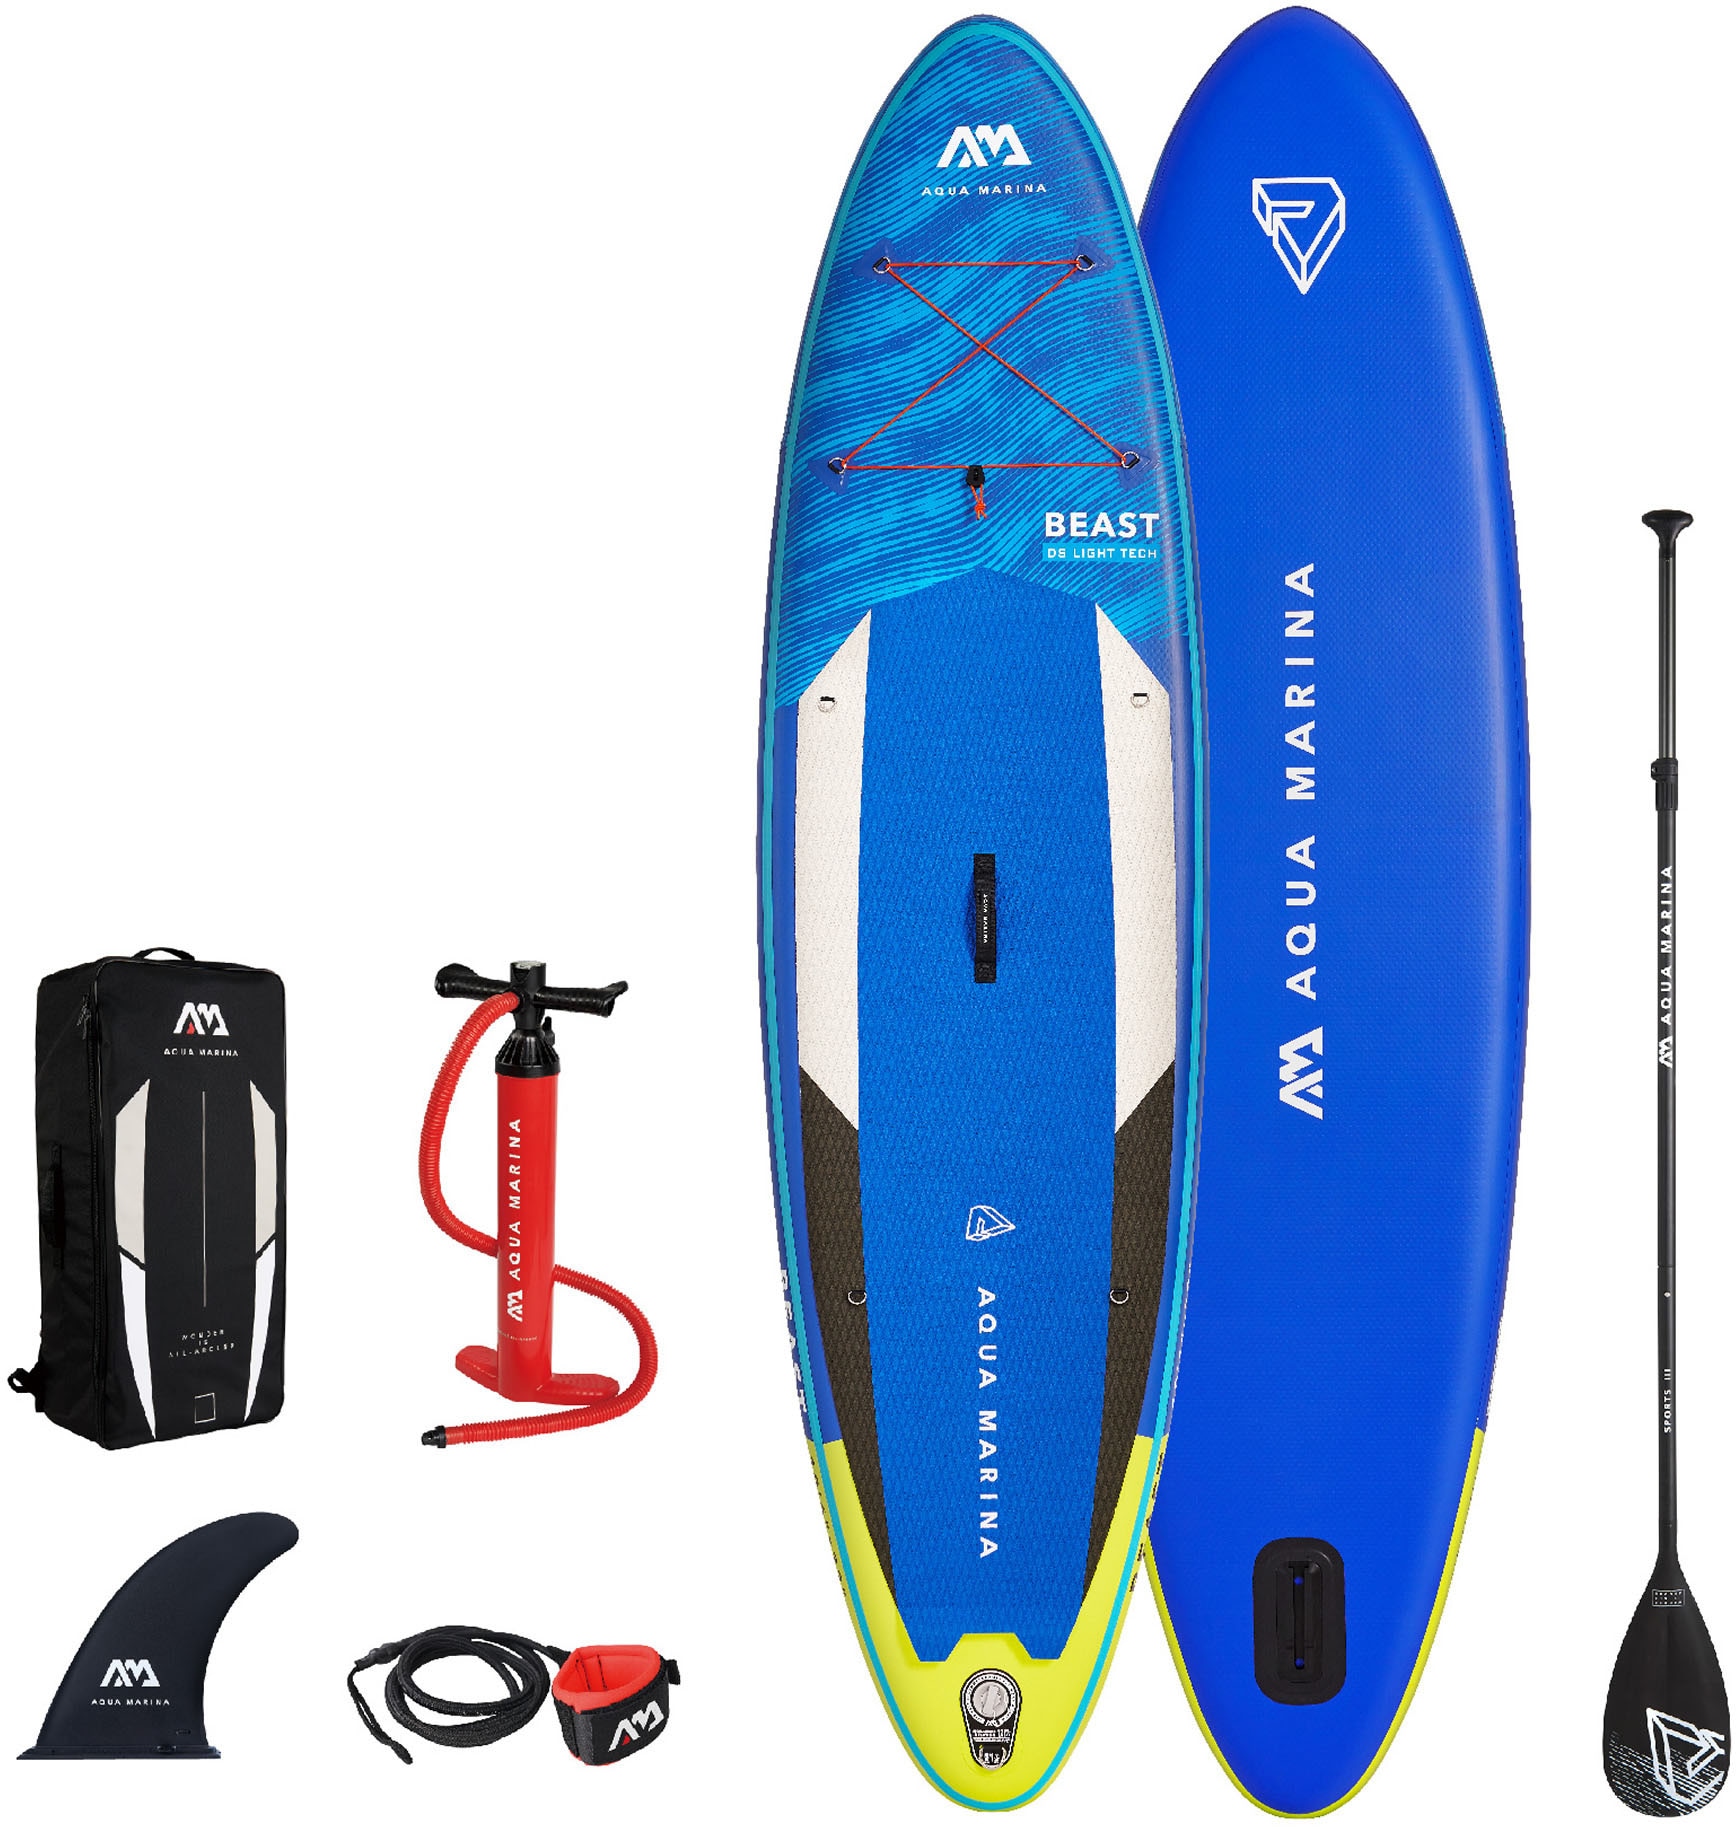 kaufen bei | SUP-Boards jetzt online Stand-Up Paddle